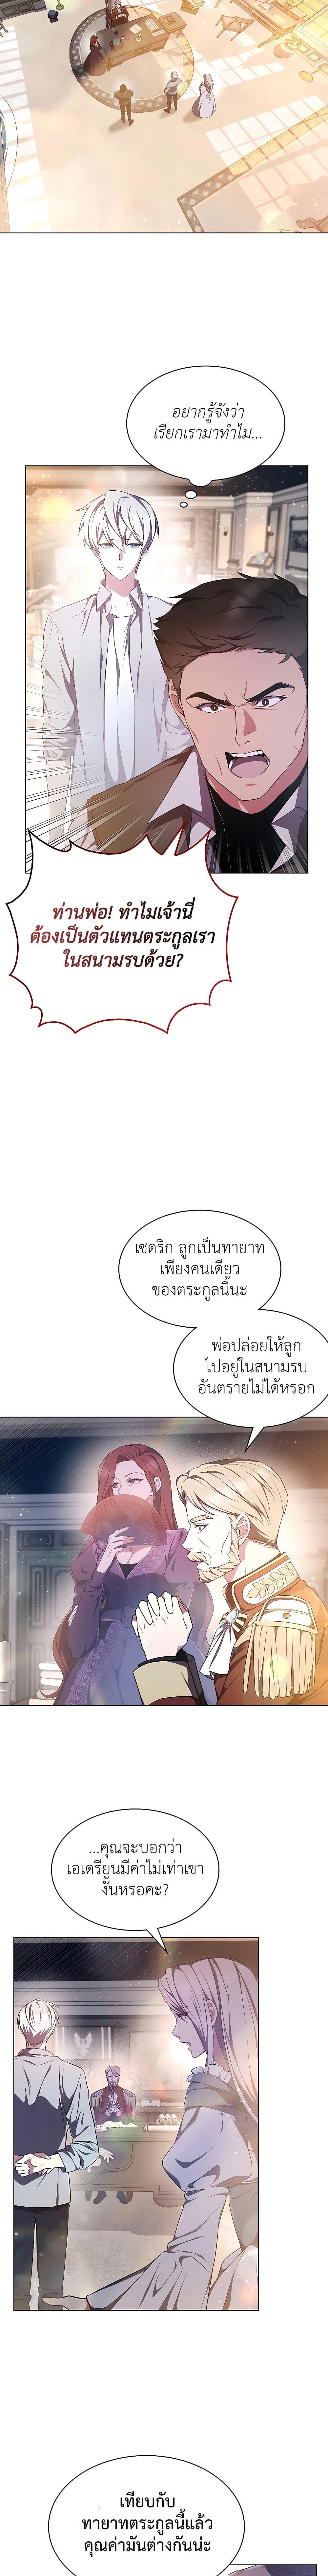 My Lucky Encounter From the Game Turned Into Reality ตอนที่ 4 (2)